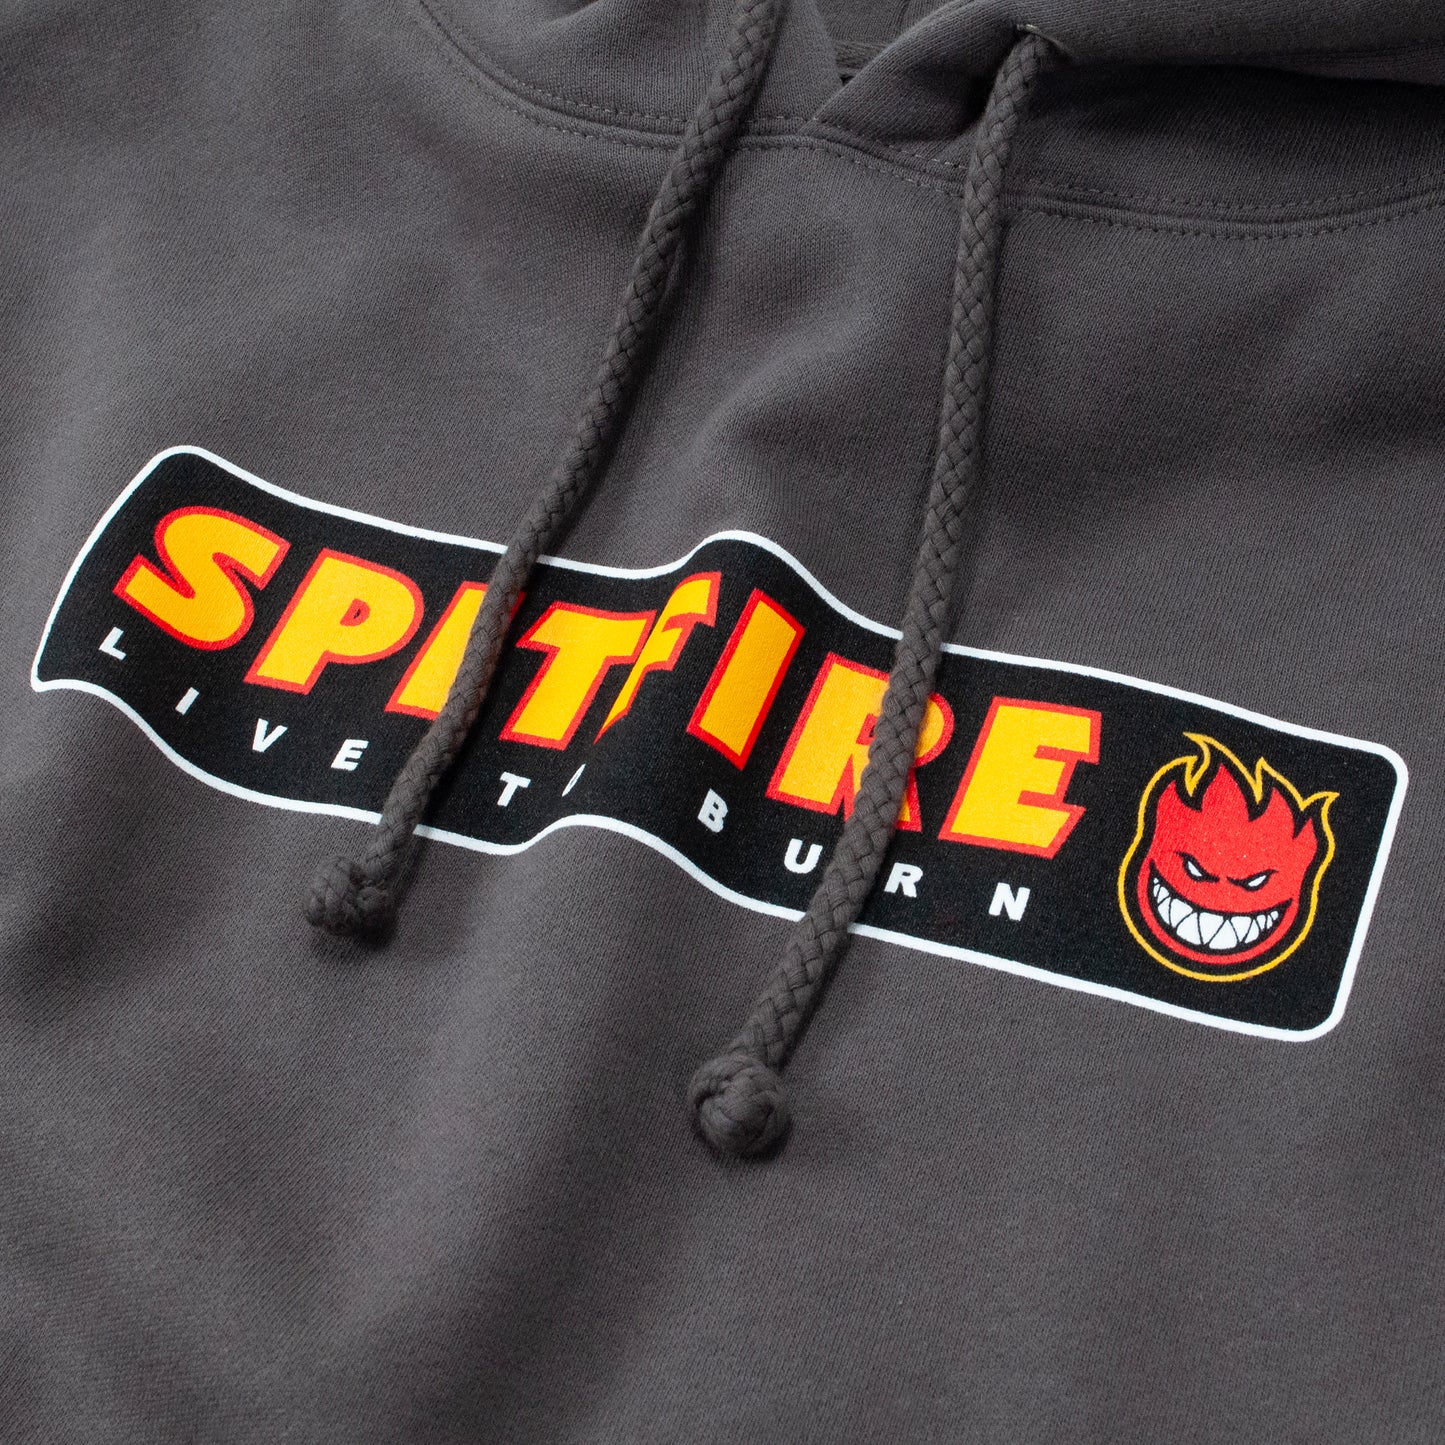 Spitfire Ltb Hooded Sweat - Charcoal/ Multi - Prime Delux Store